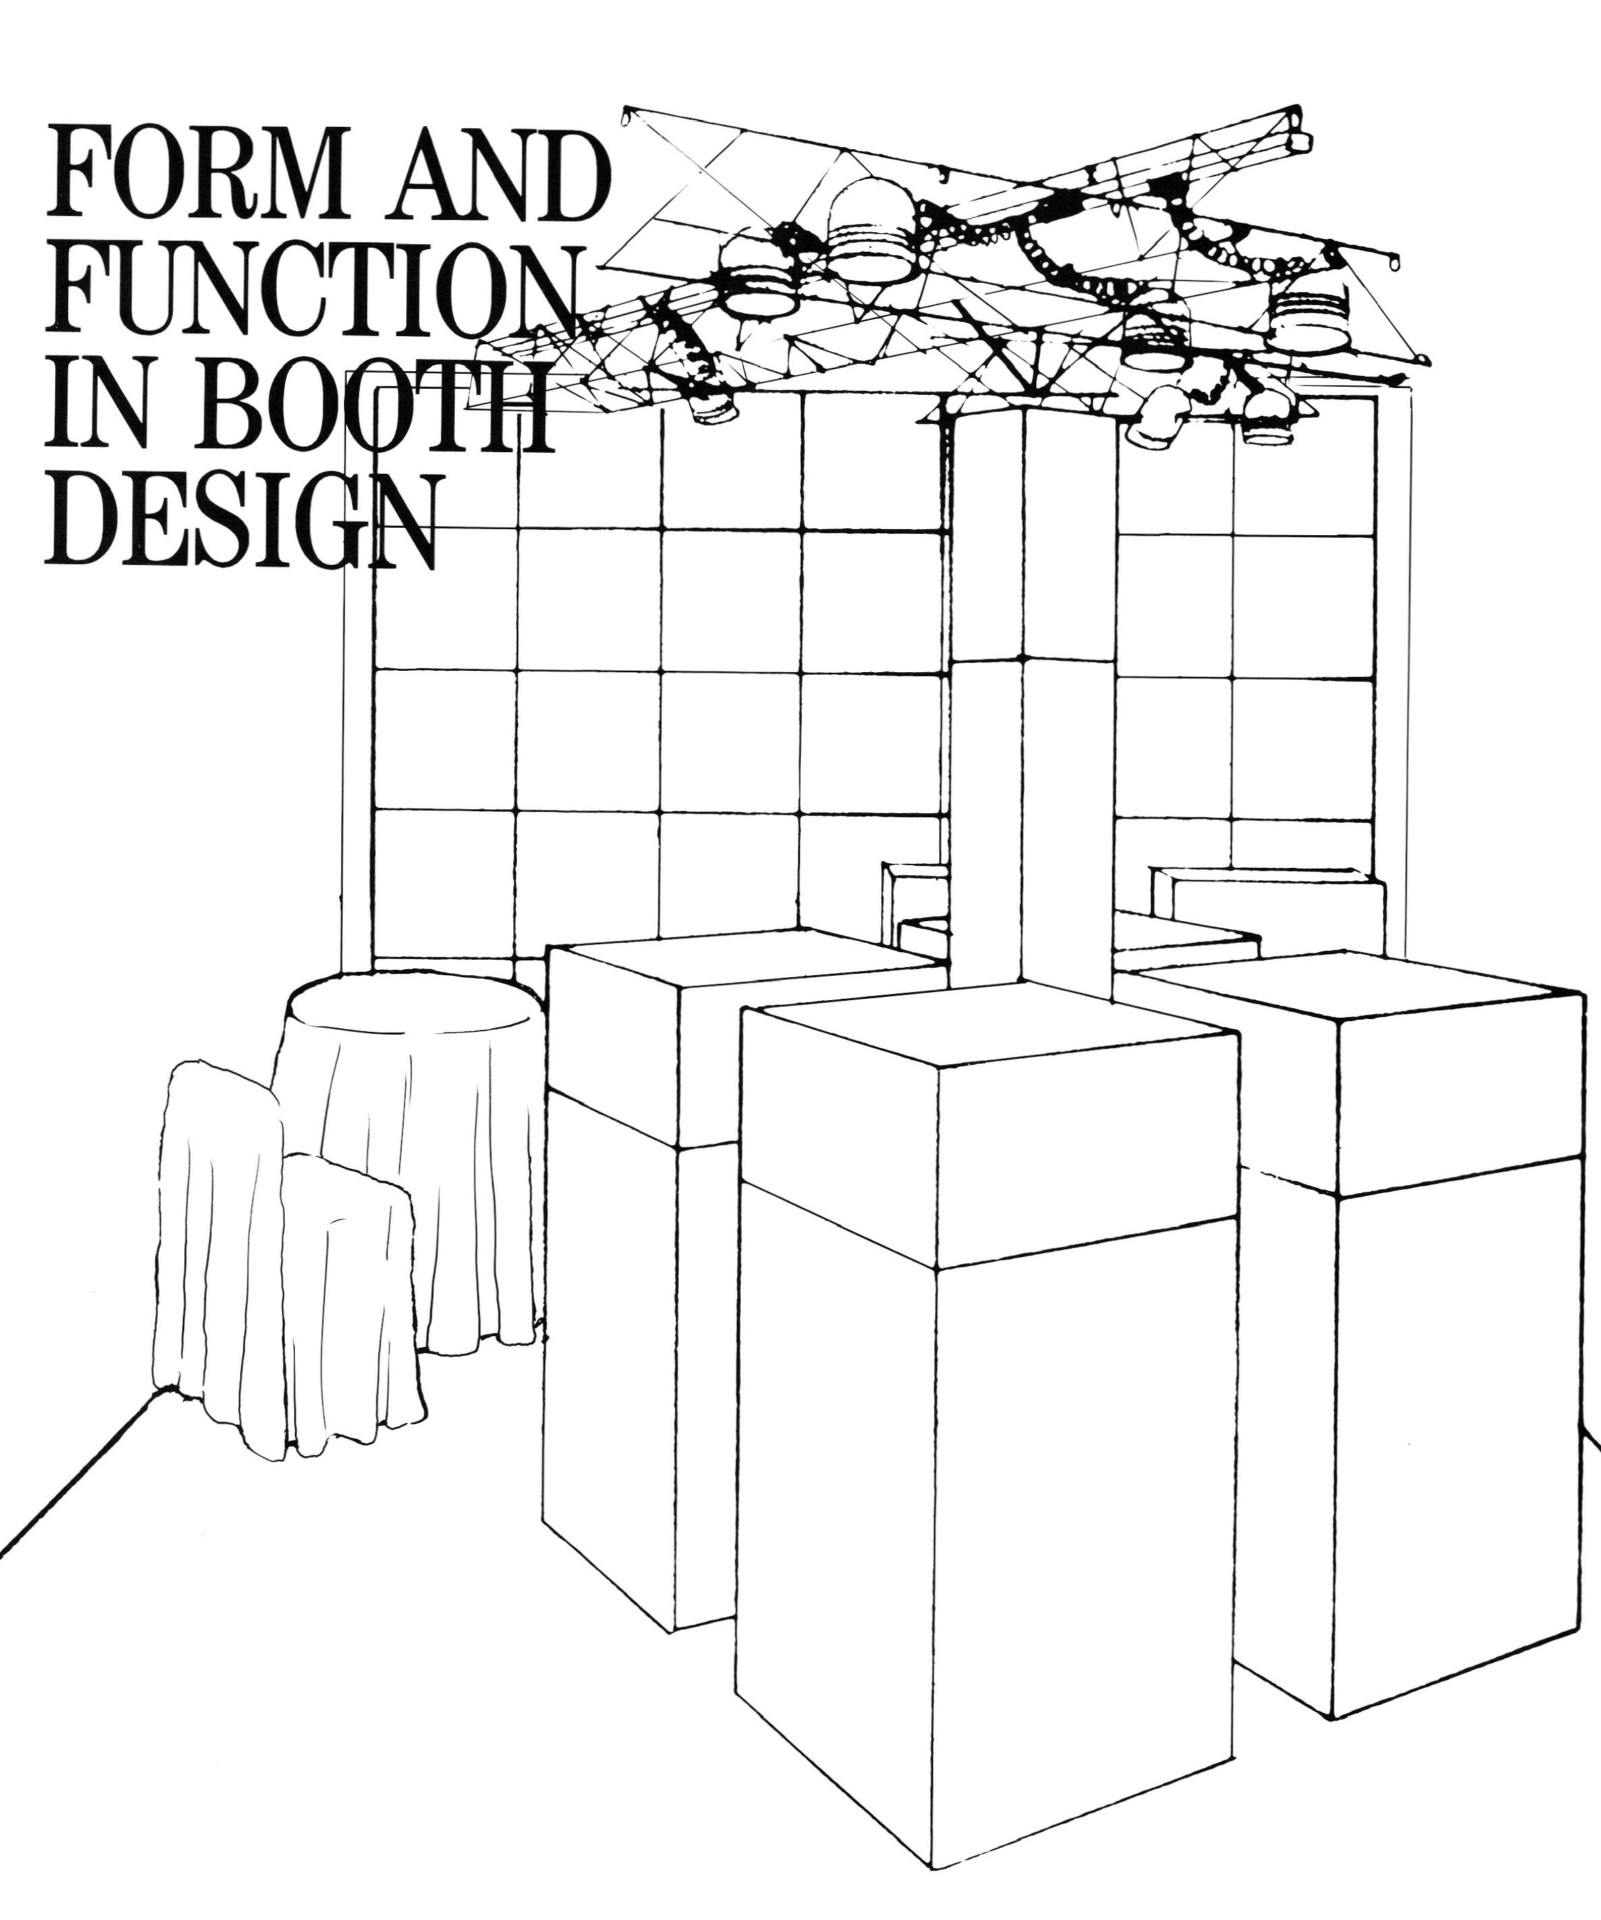 Form and Function in Booth Design